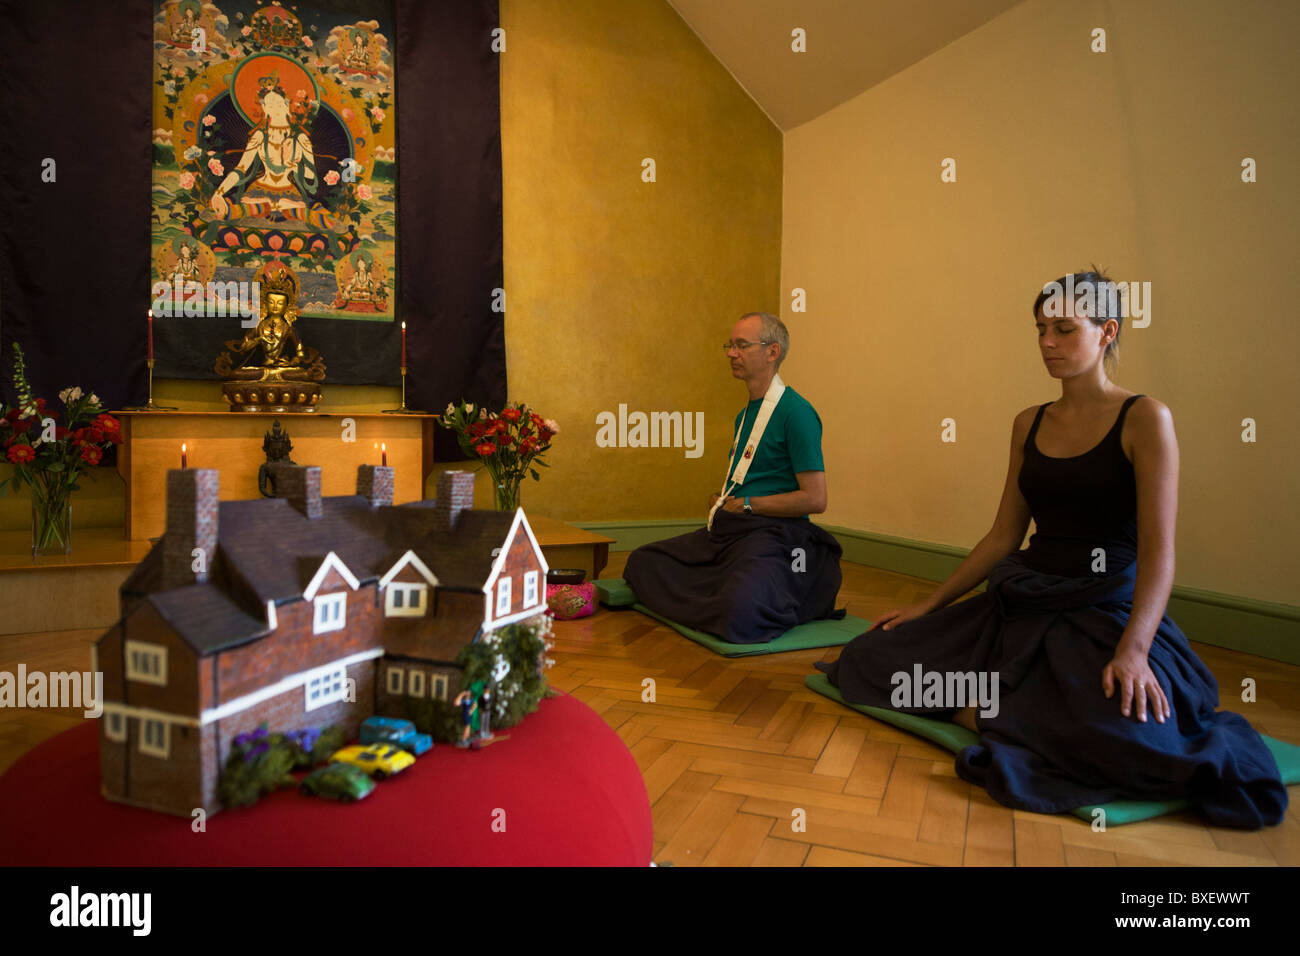 Buddhists meditate in silence for 30 minutes in their Shrine Room at the Rivendell Buddhist Retreat Centre, England. Stock Photo